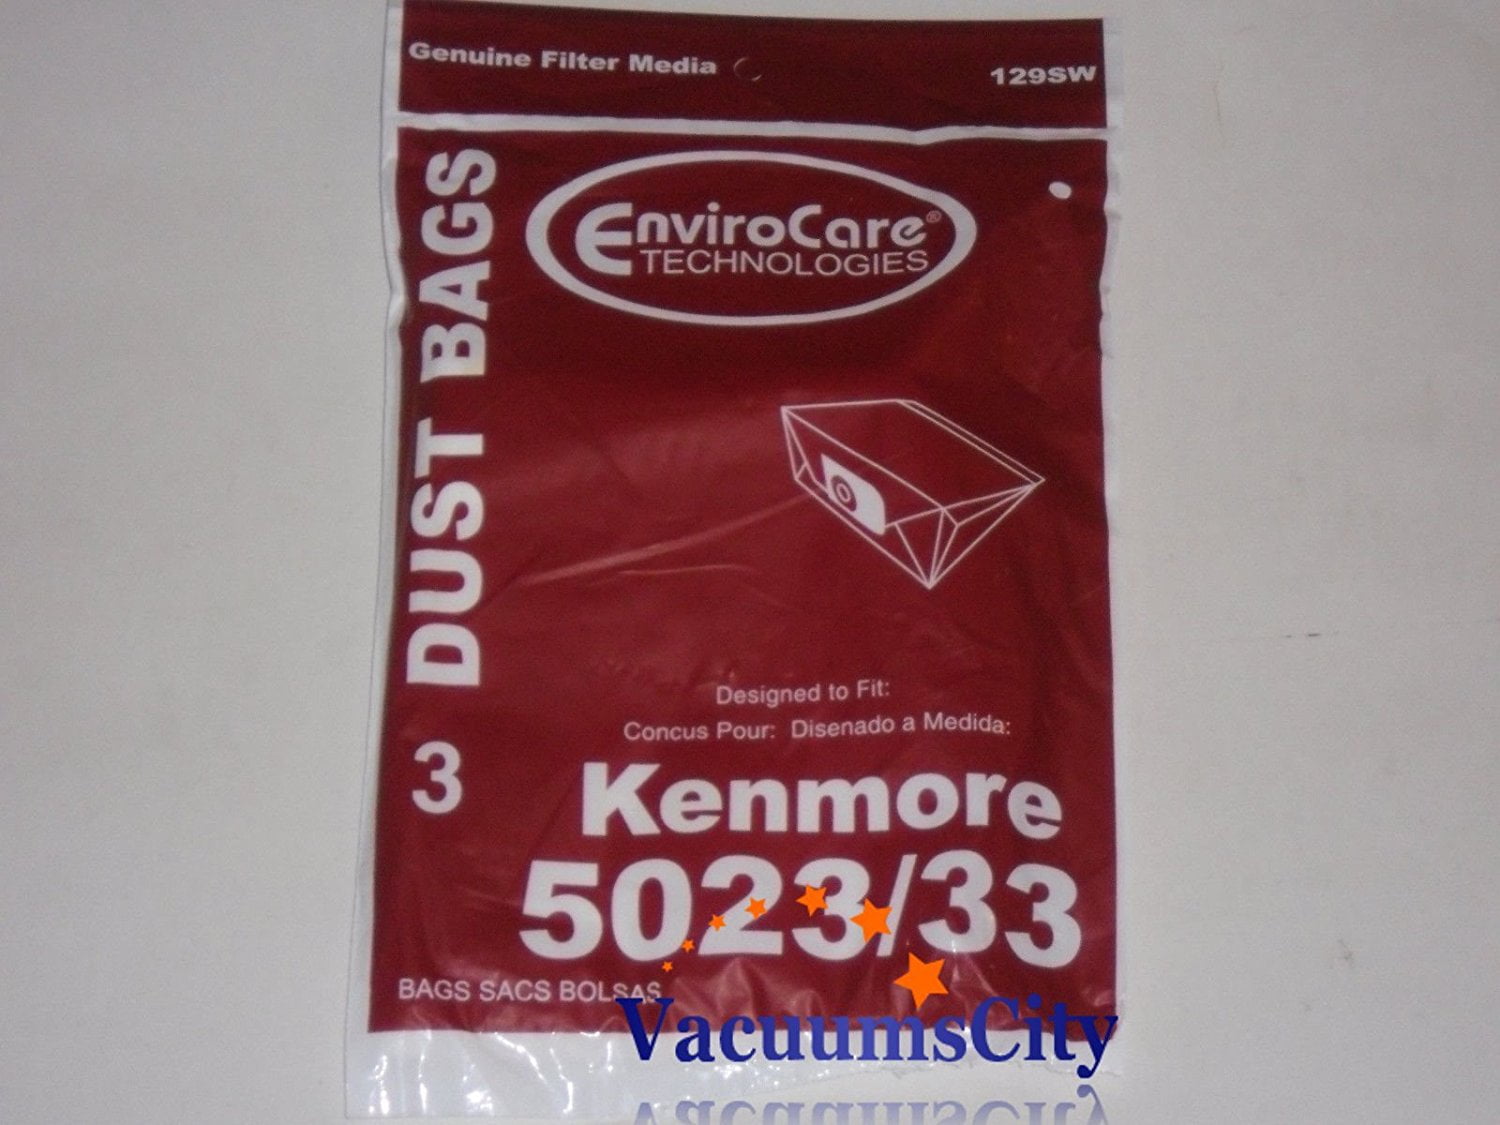 Sears Canister Style Vac 3 Kenmore 5023 5033 20-5033 Type E Vacuum Cleaner Bags 